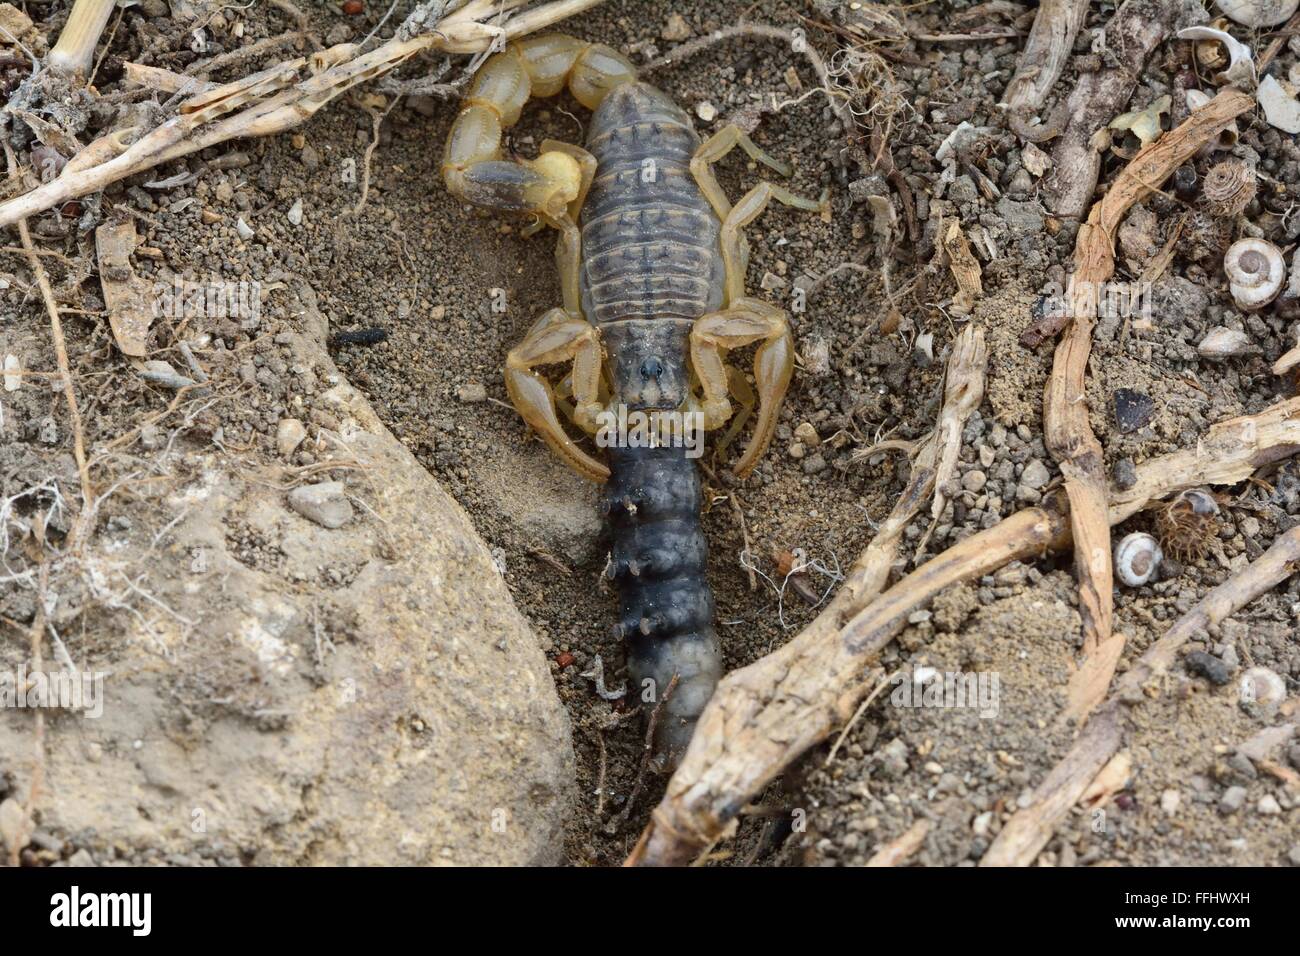 Common yellow scorpion (Buthus occitanus) with prey. A scorpion in the family Buthidae, eating a grub in hills in Azerbaijan Stock Photo